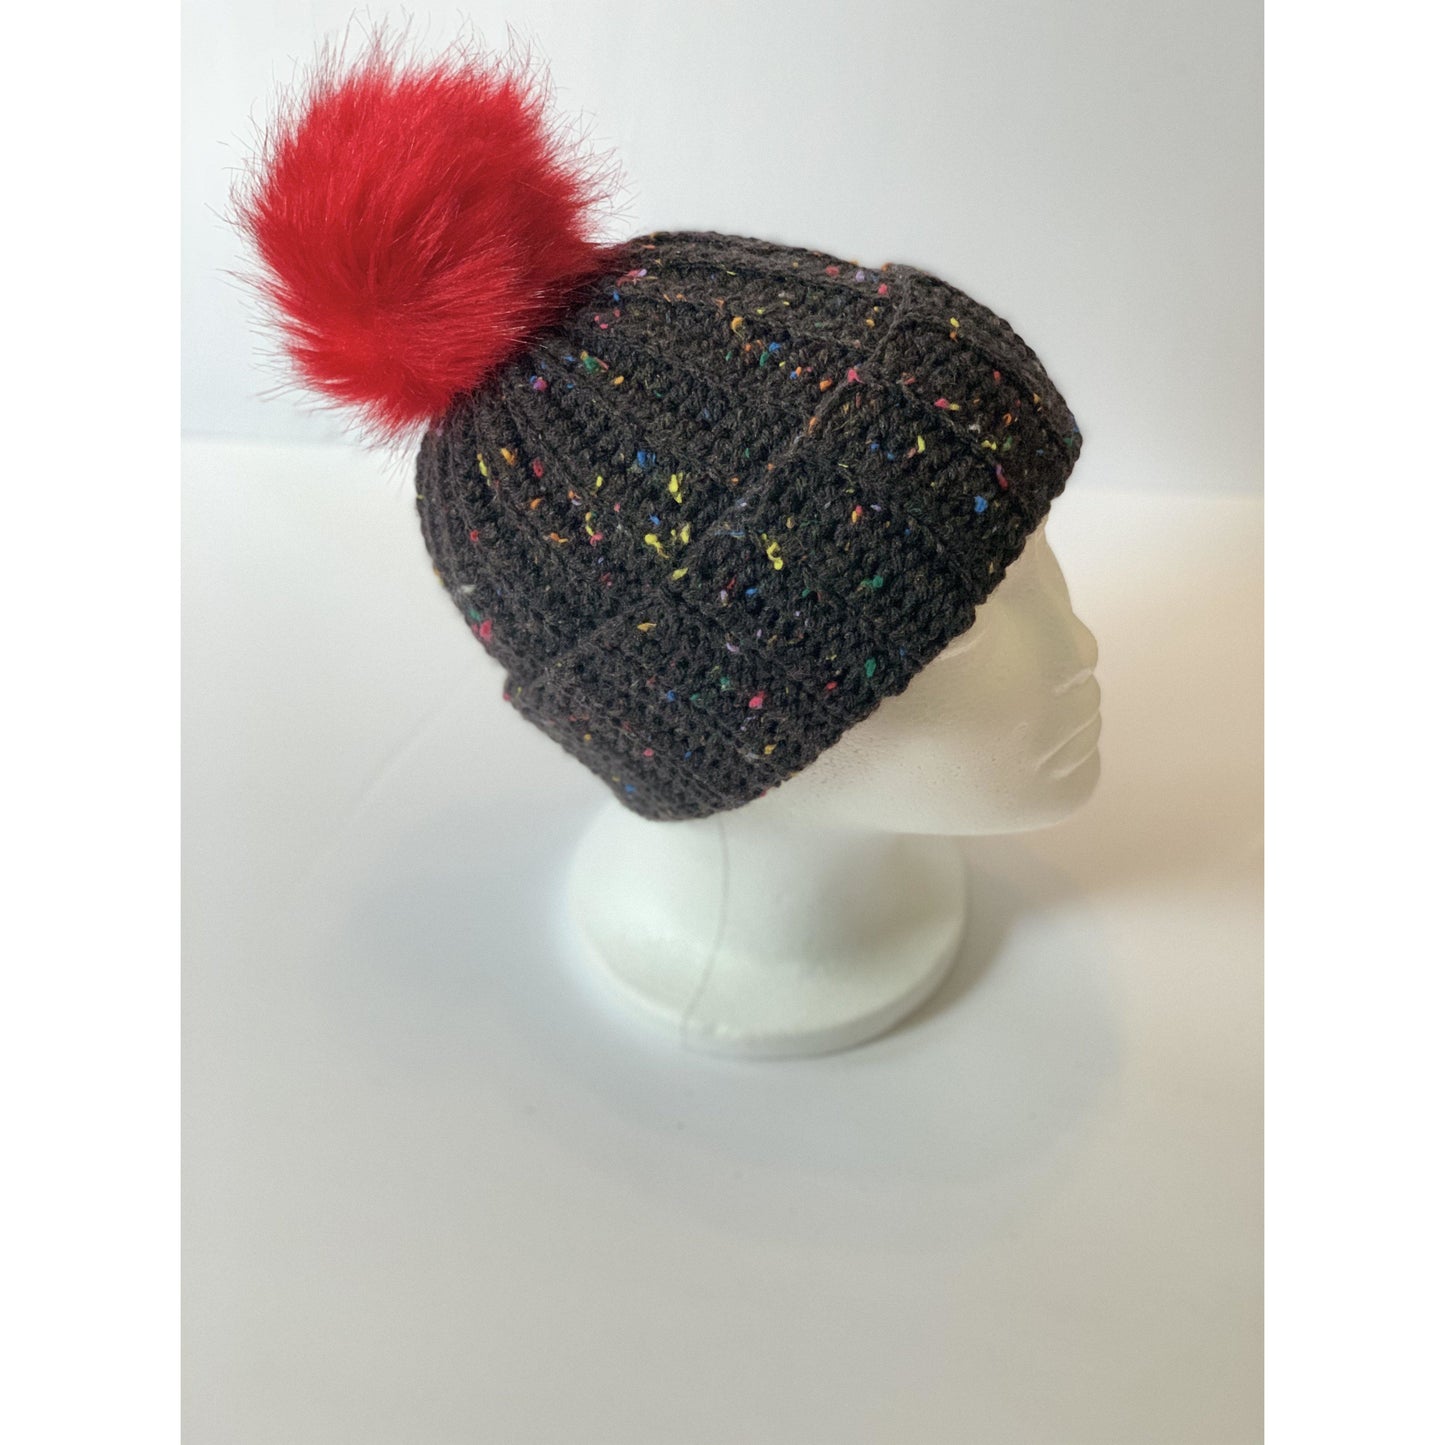 Ribbed Beanie-Charcoal Tweed-Hat-Lenma's Creations